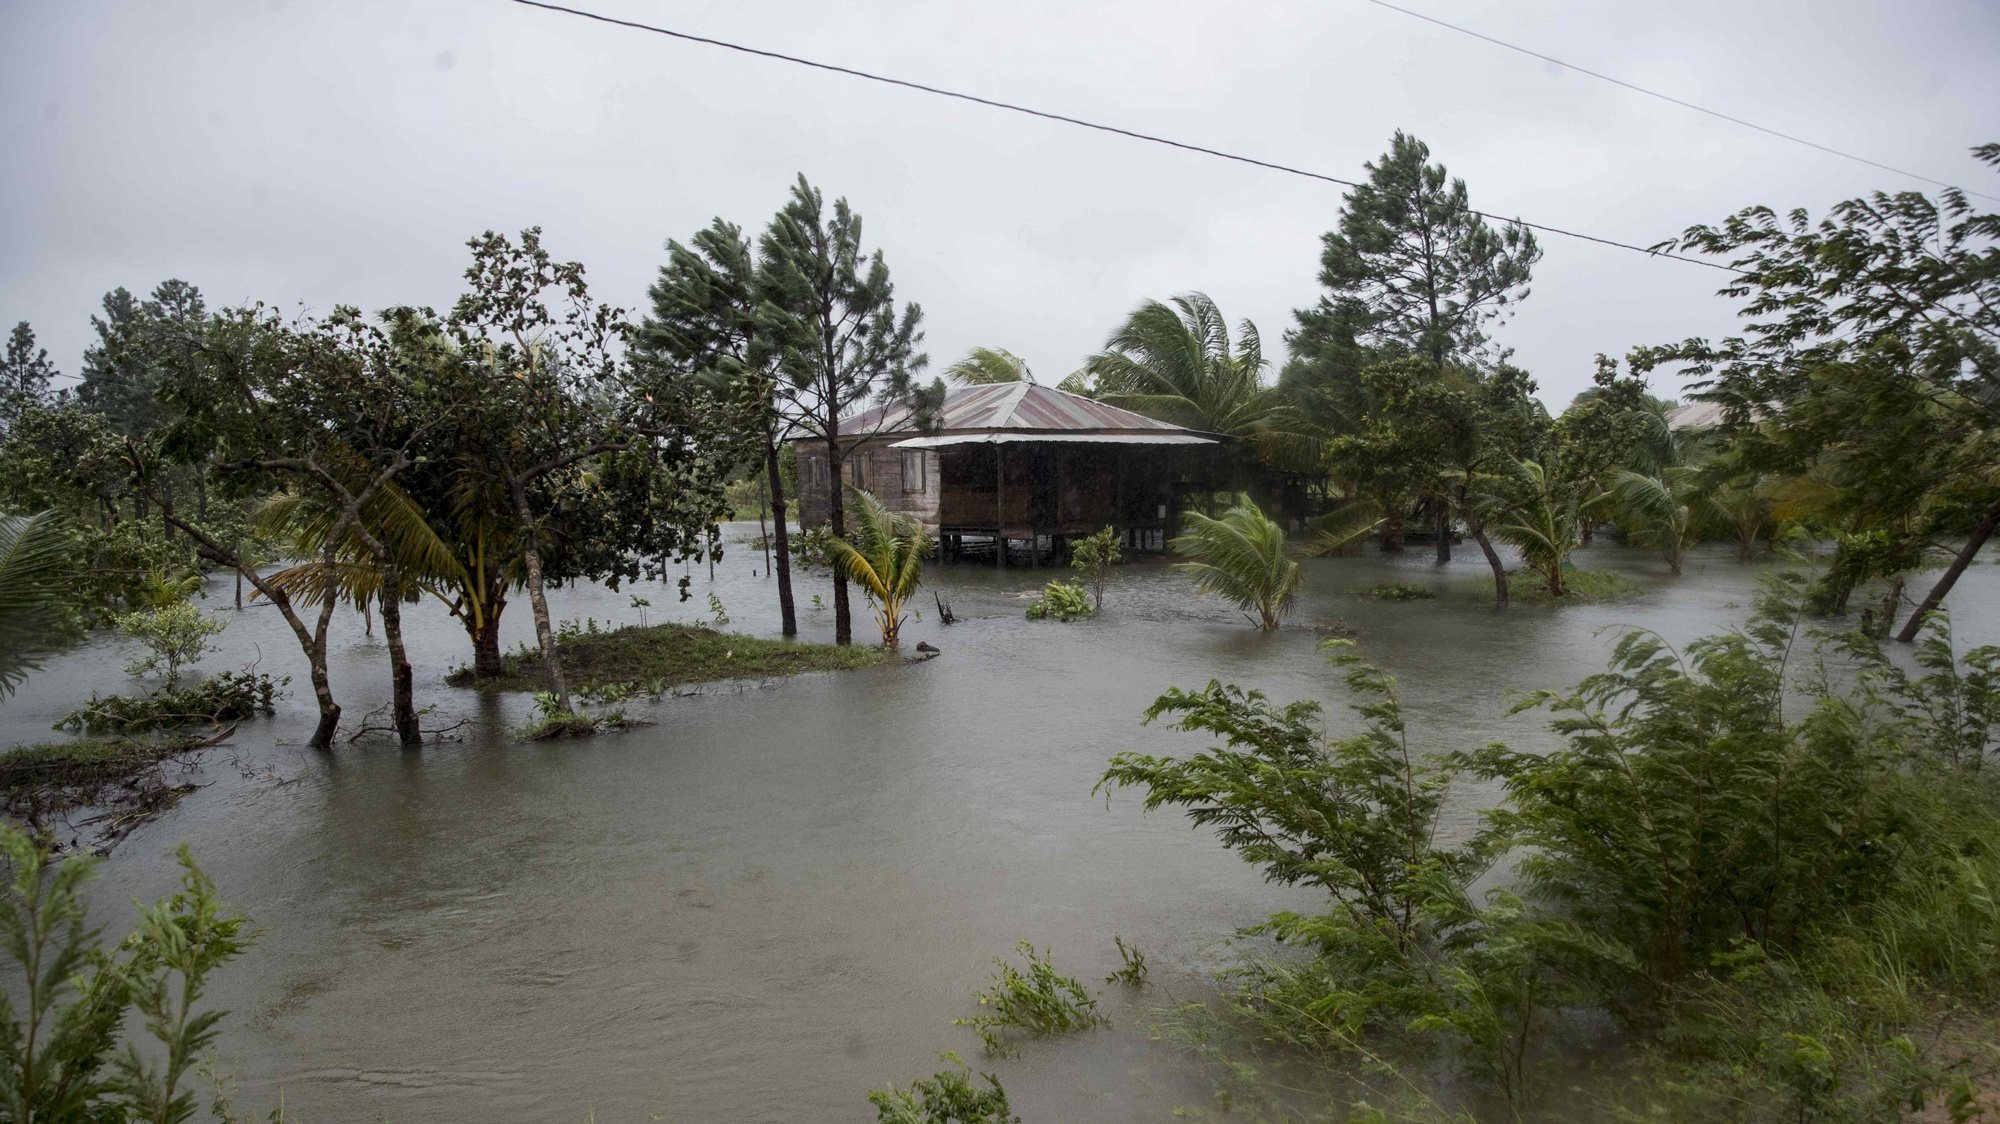 epa08797244 A house that was evacuated amid amid heavy rains brought by Hurricane Eta, in Bilwi, Nicaragua, 03 November 2020. Hurricane Eta, category 4 on the Saffir-Simpson scale and considered extremely dangerous, made landfall on 03 November on the northeast coast of Nicaragua.  EPA/JORGE TORRES